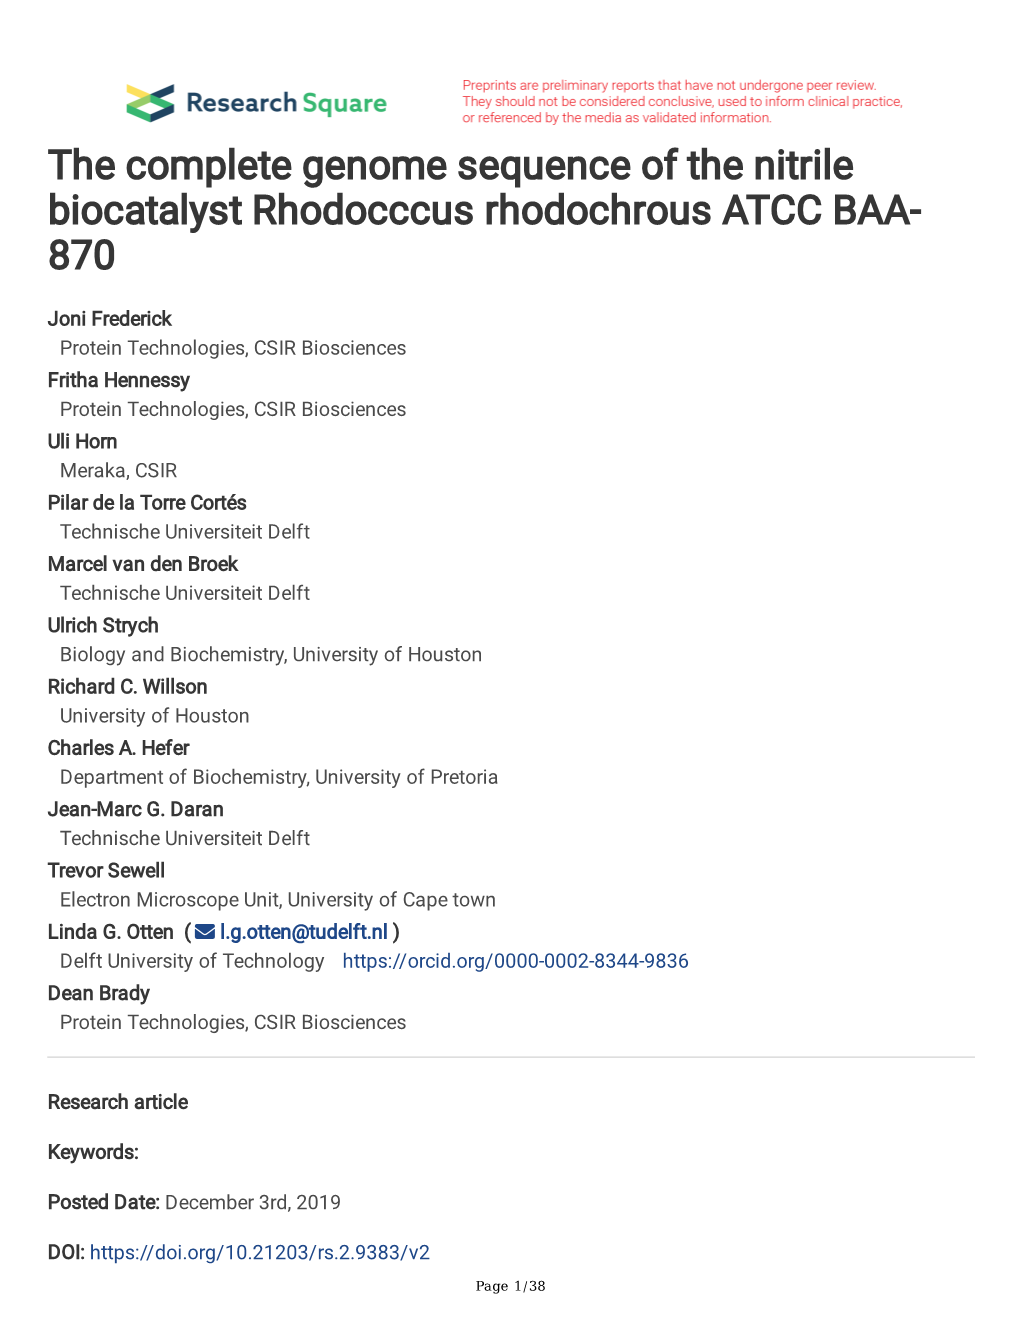 The Complete Genome Sequence of the Nitrile Biocatalyst Rhodocccus Rhodochrous ATCC BAA- 870